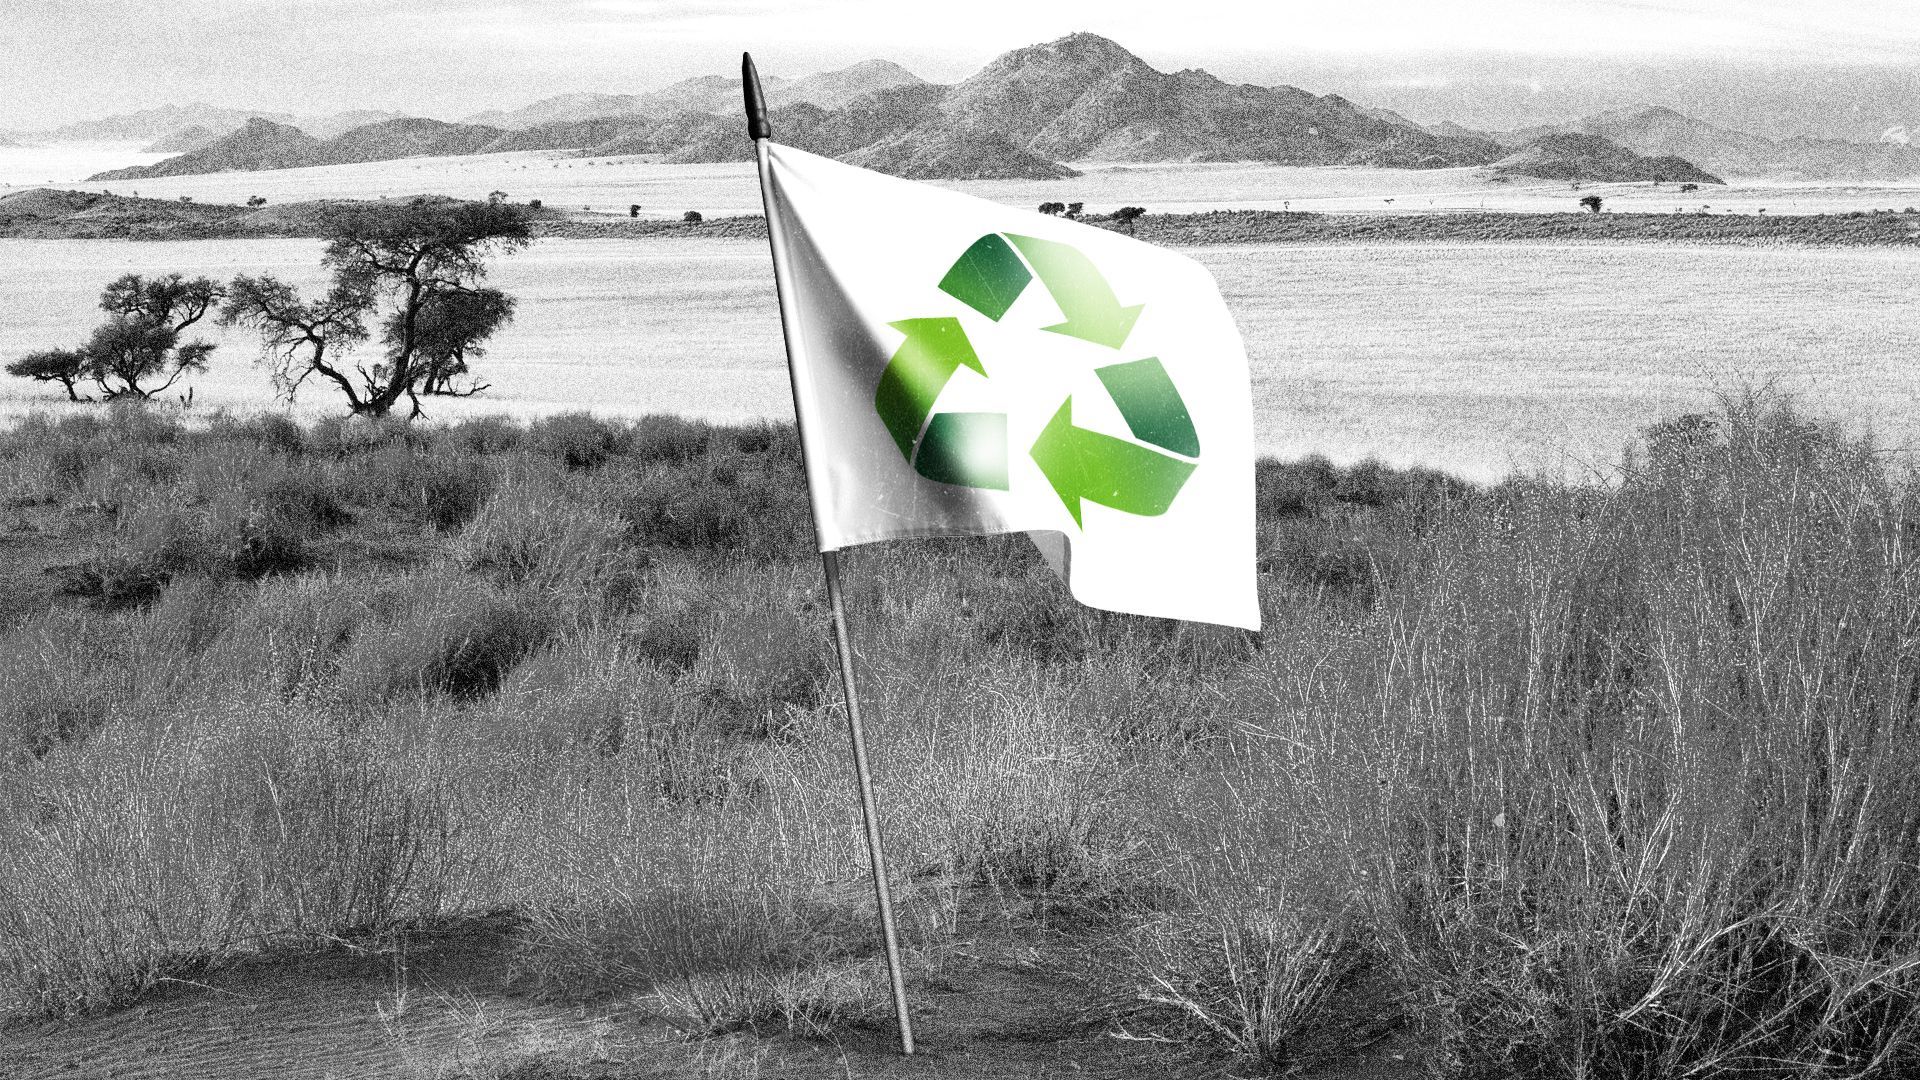 Illustration of a vintage black and white photograph of an African landscape with a flag featuring the recycle symbol